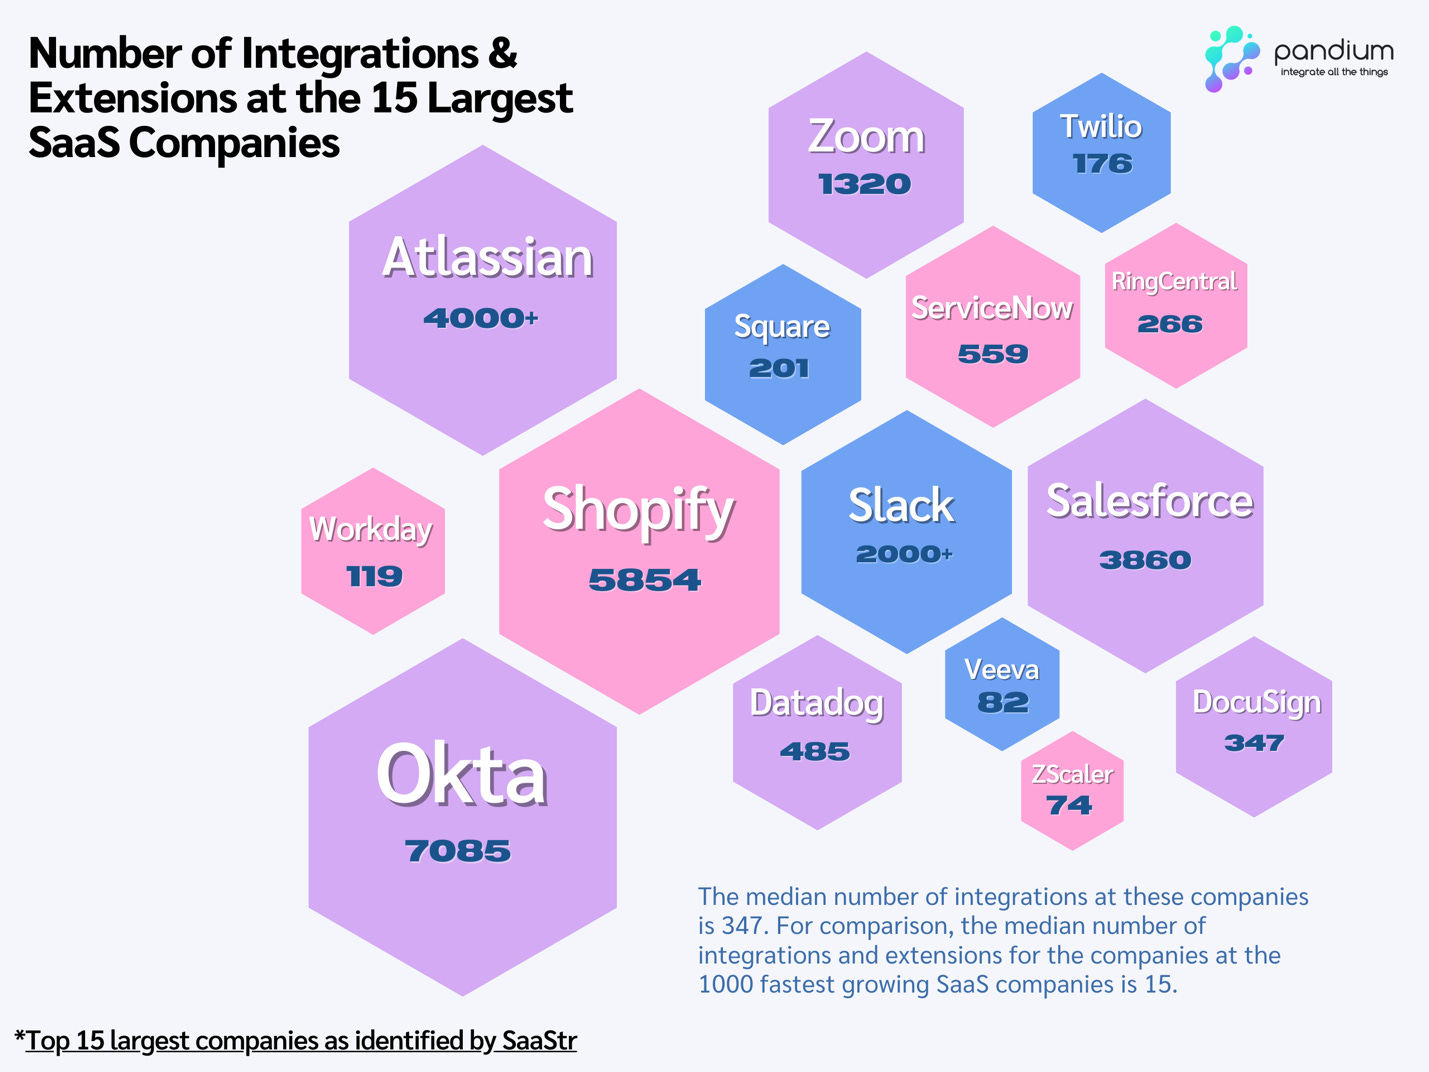 In this diagram Okta has over 7000 integrations. Shopify has 5800. Salesforce 3800. All the way down to workday with 119